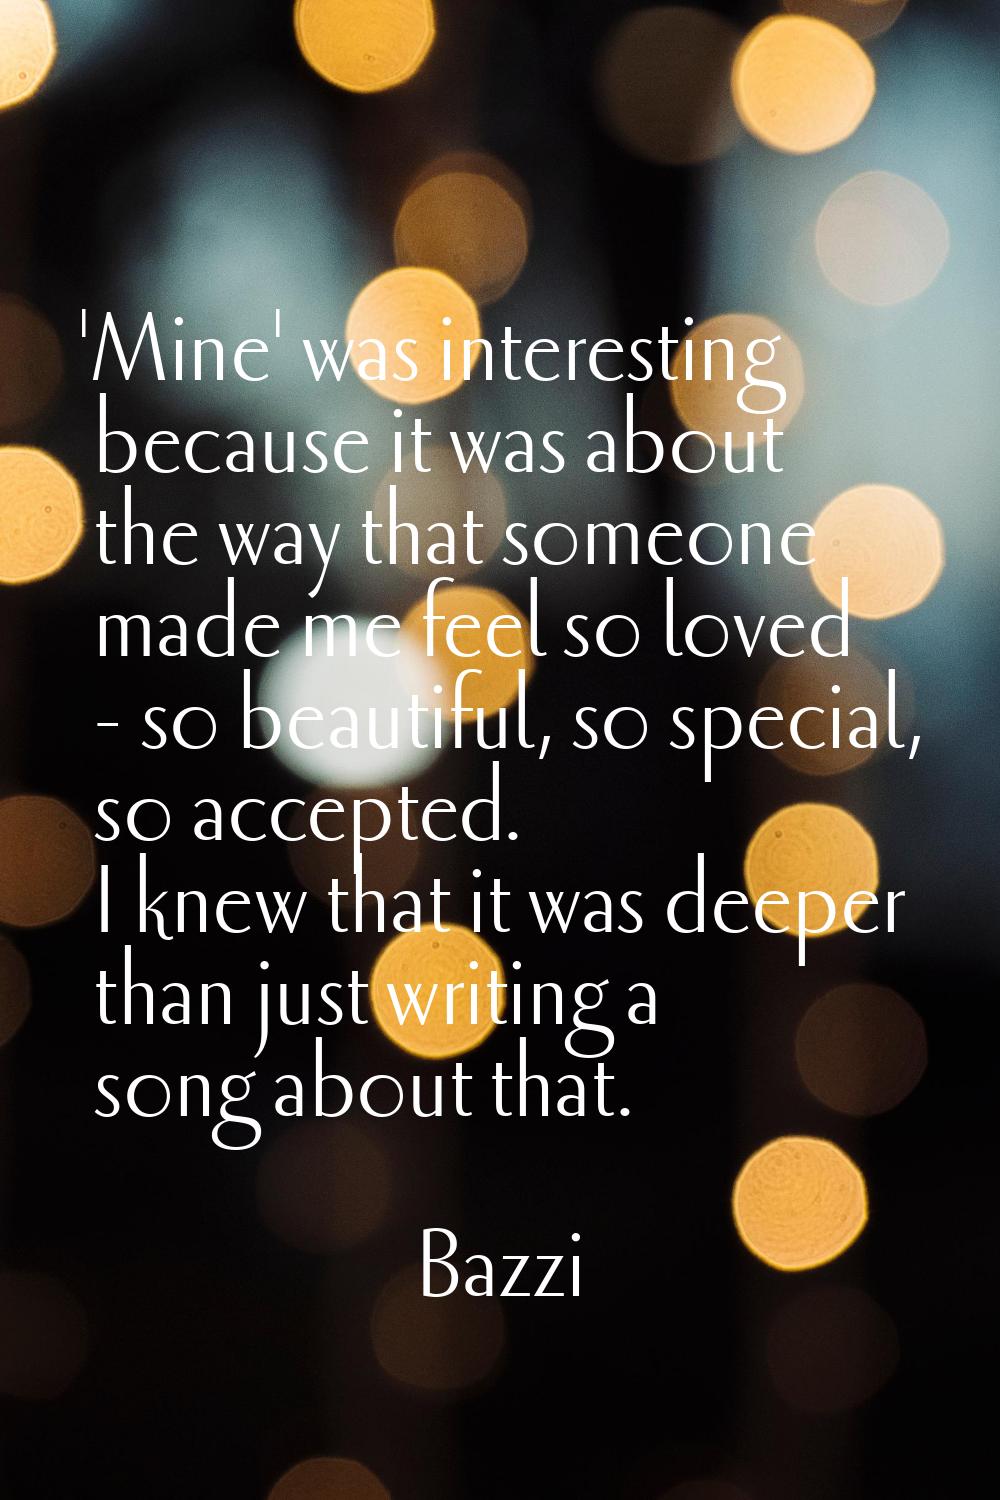 'Mine' was interesting because it was about the way that someone made me feel so loved - so beautif